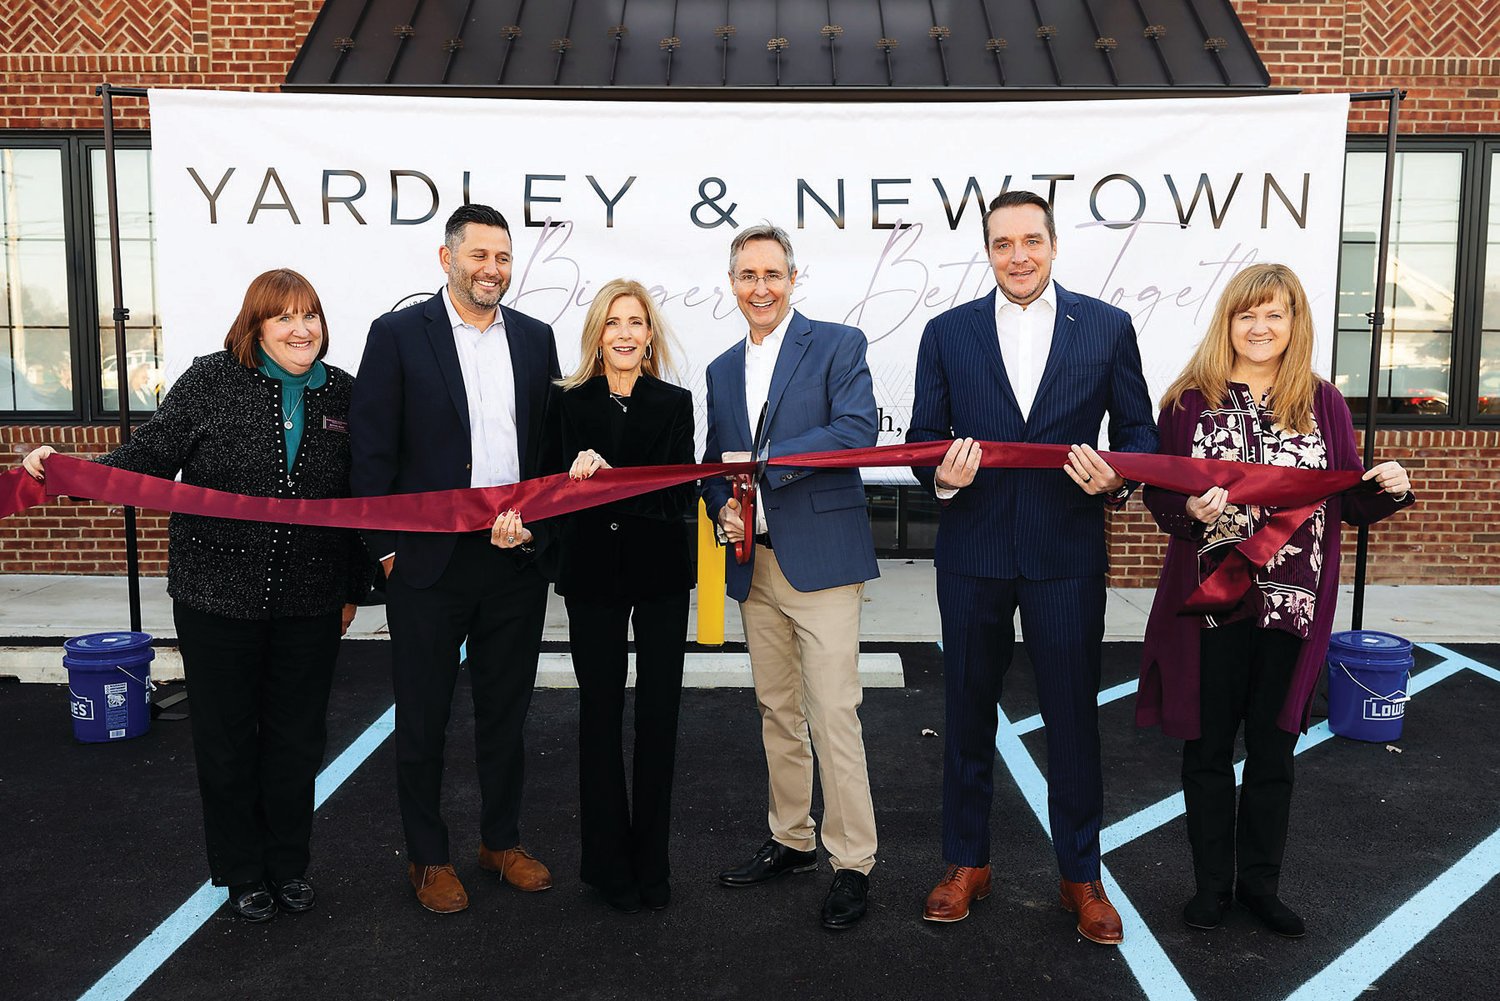 Berkshire Hathaway HomeServices (BHHS) Fox & Roach, Realtors held an official ribbon-cutting and open house for its new Yardley Newtown Sales Center.